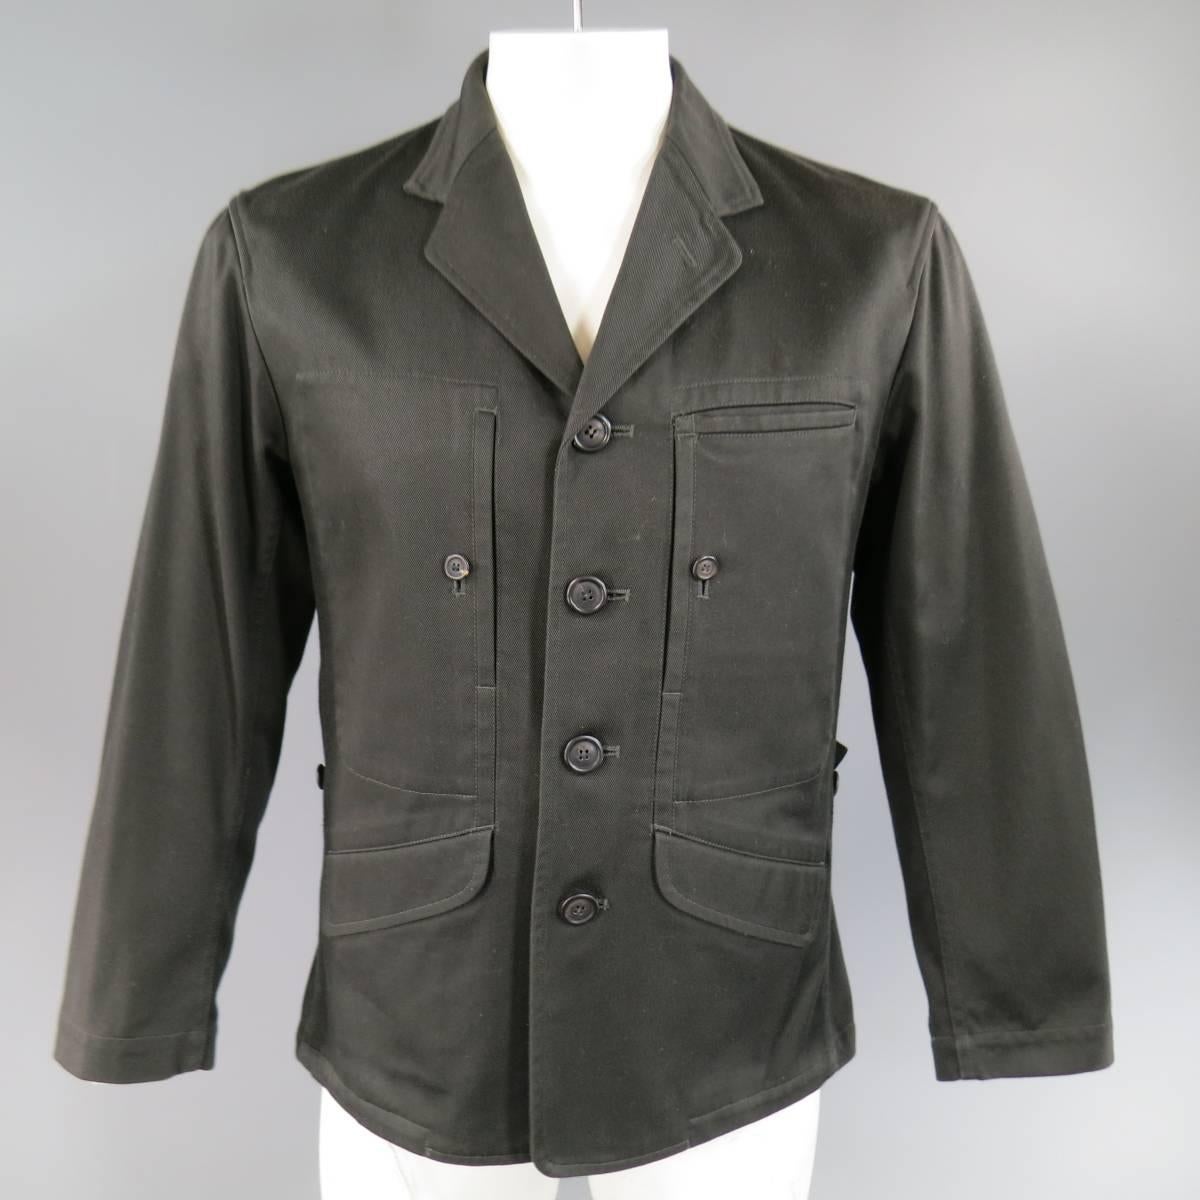 This rare vintage ISSEY MIYAKE MAN jacket comes in an olive charcoal cotton twill and features a notch lapel, four button closure, double slanted flap pockets, vertical button slip patch pockets on the chest, elastic drawstring hem, and back tabs.